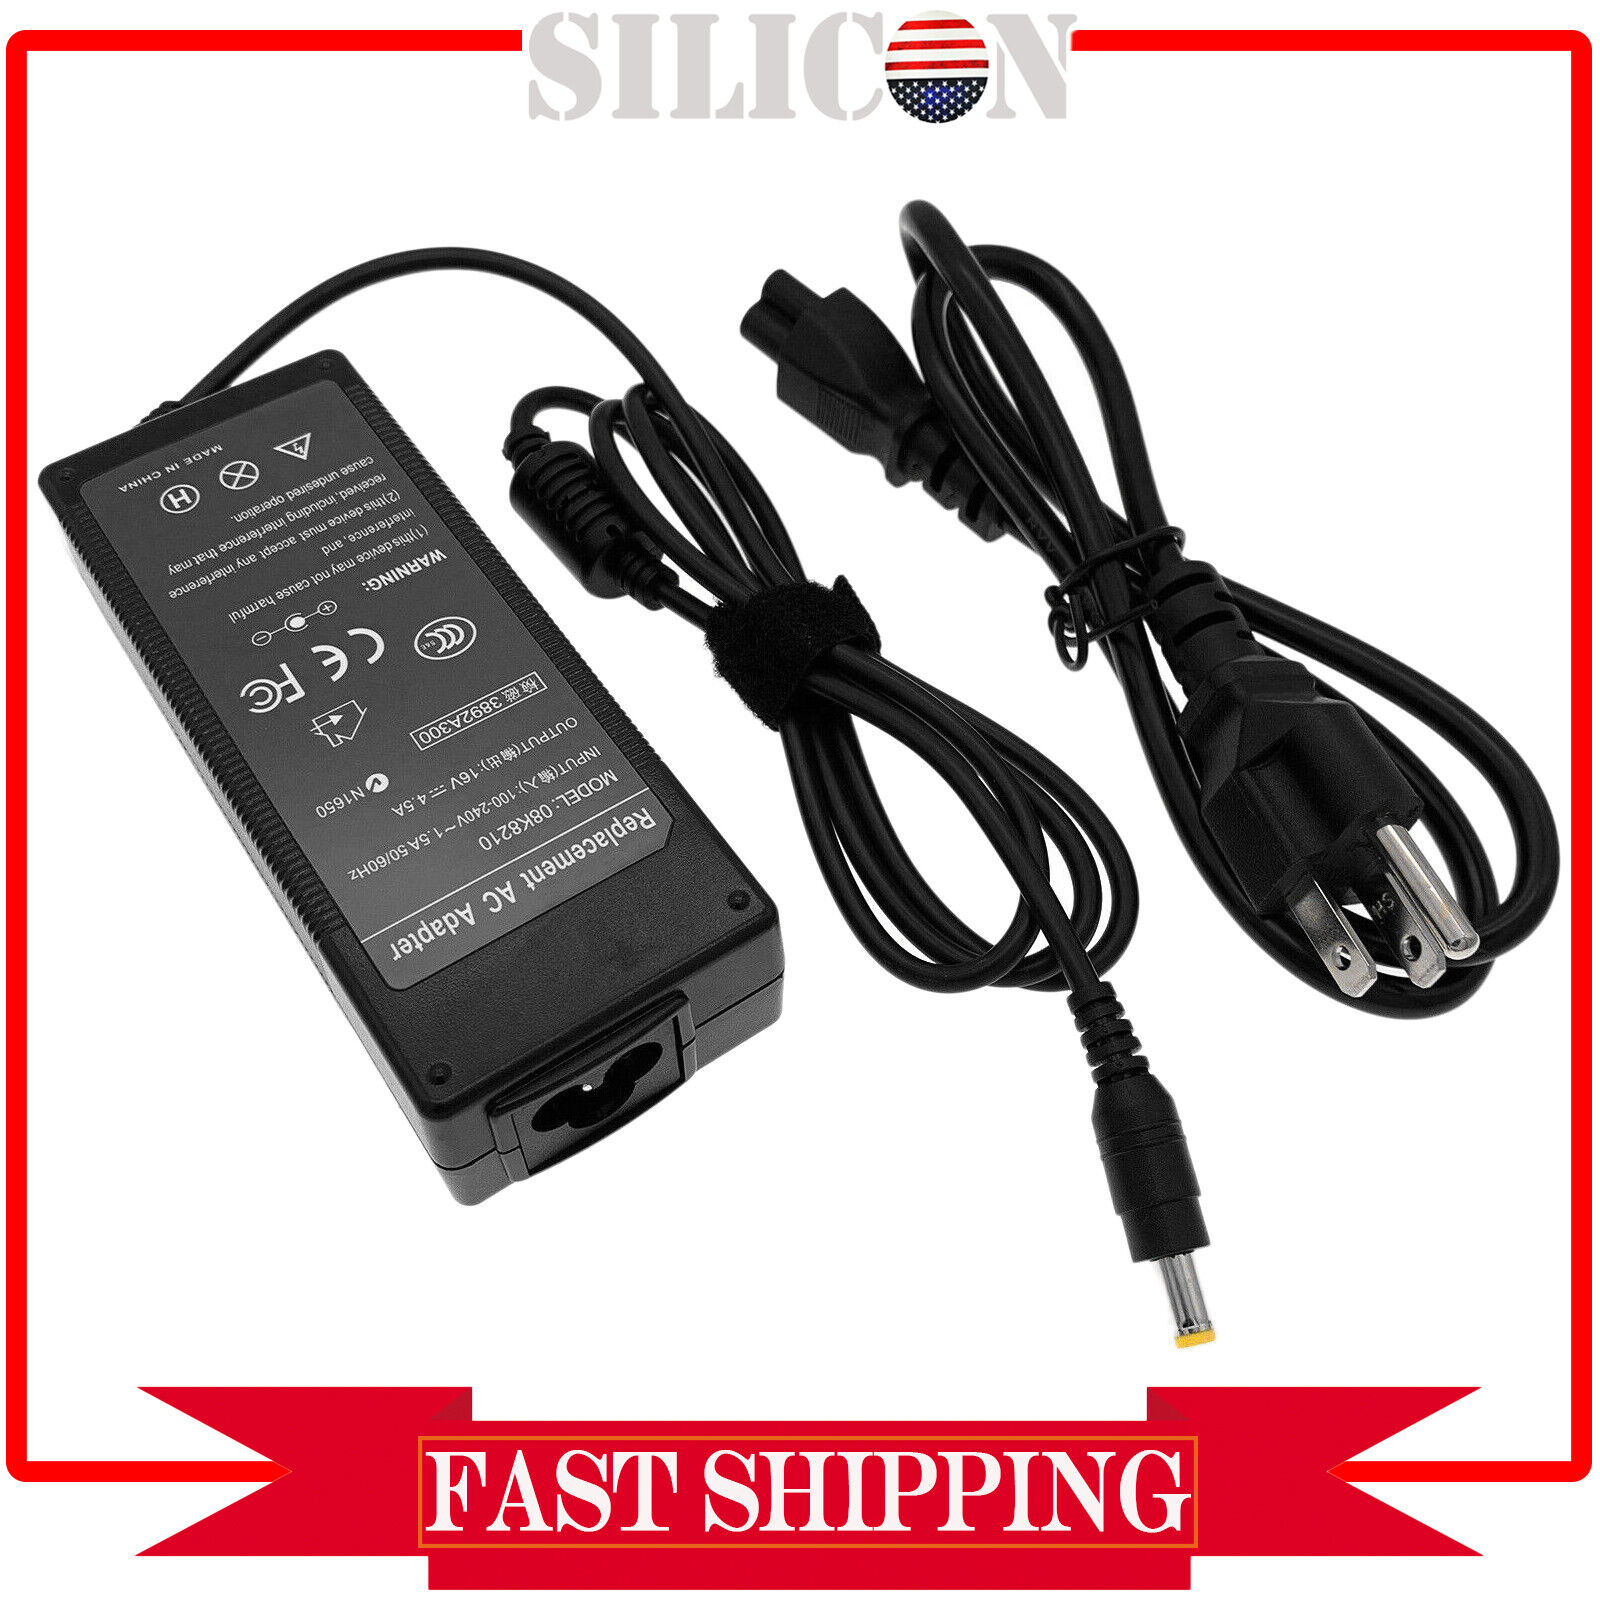 New AC Power Adapter Charger Cord For Panasonic Toughpad FZ-G1 FZ-M1 4K Tablet